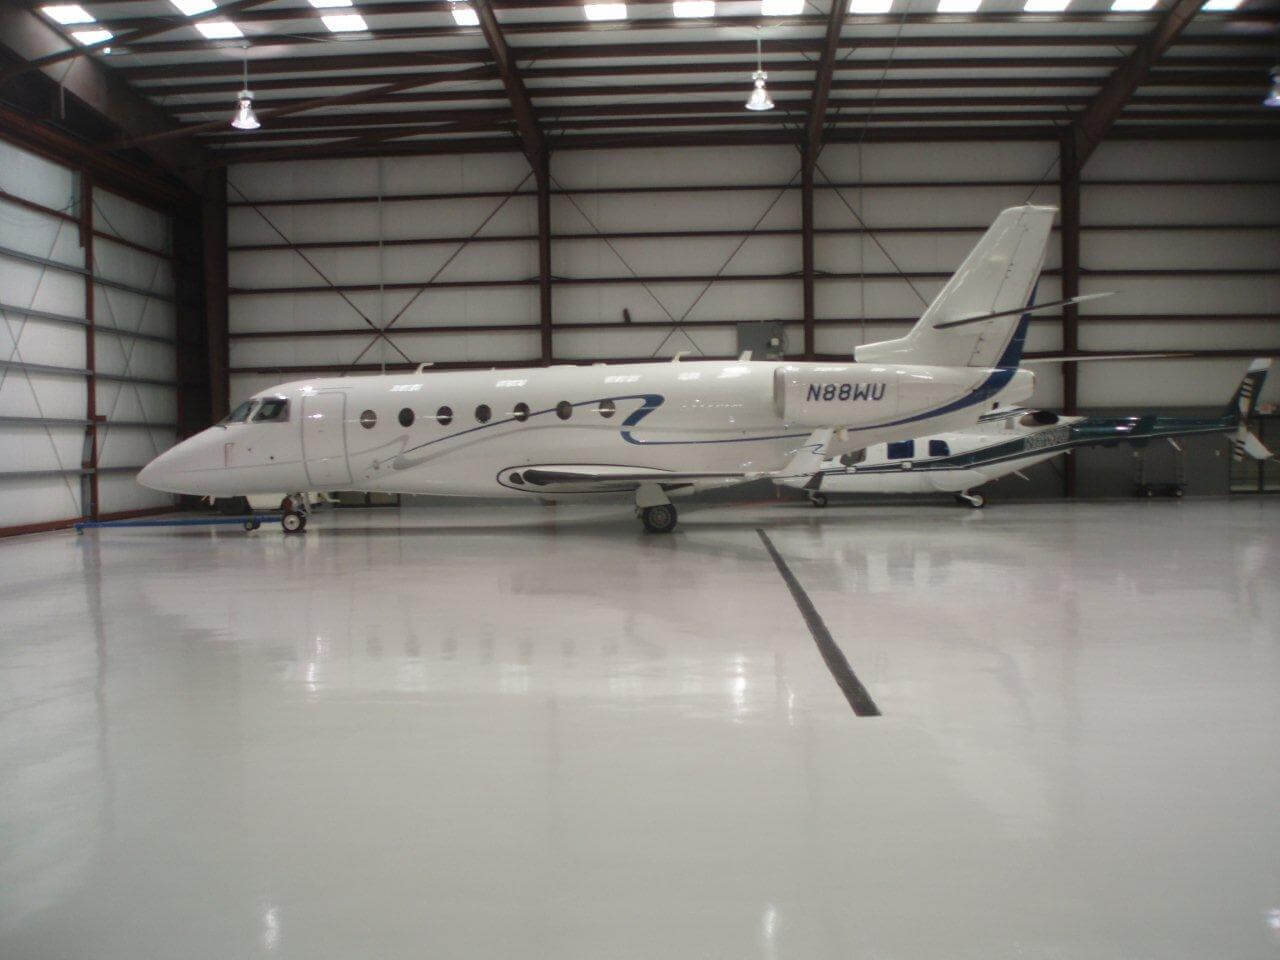 white flooring at a private jet hangar